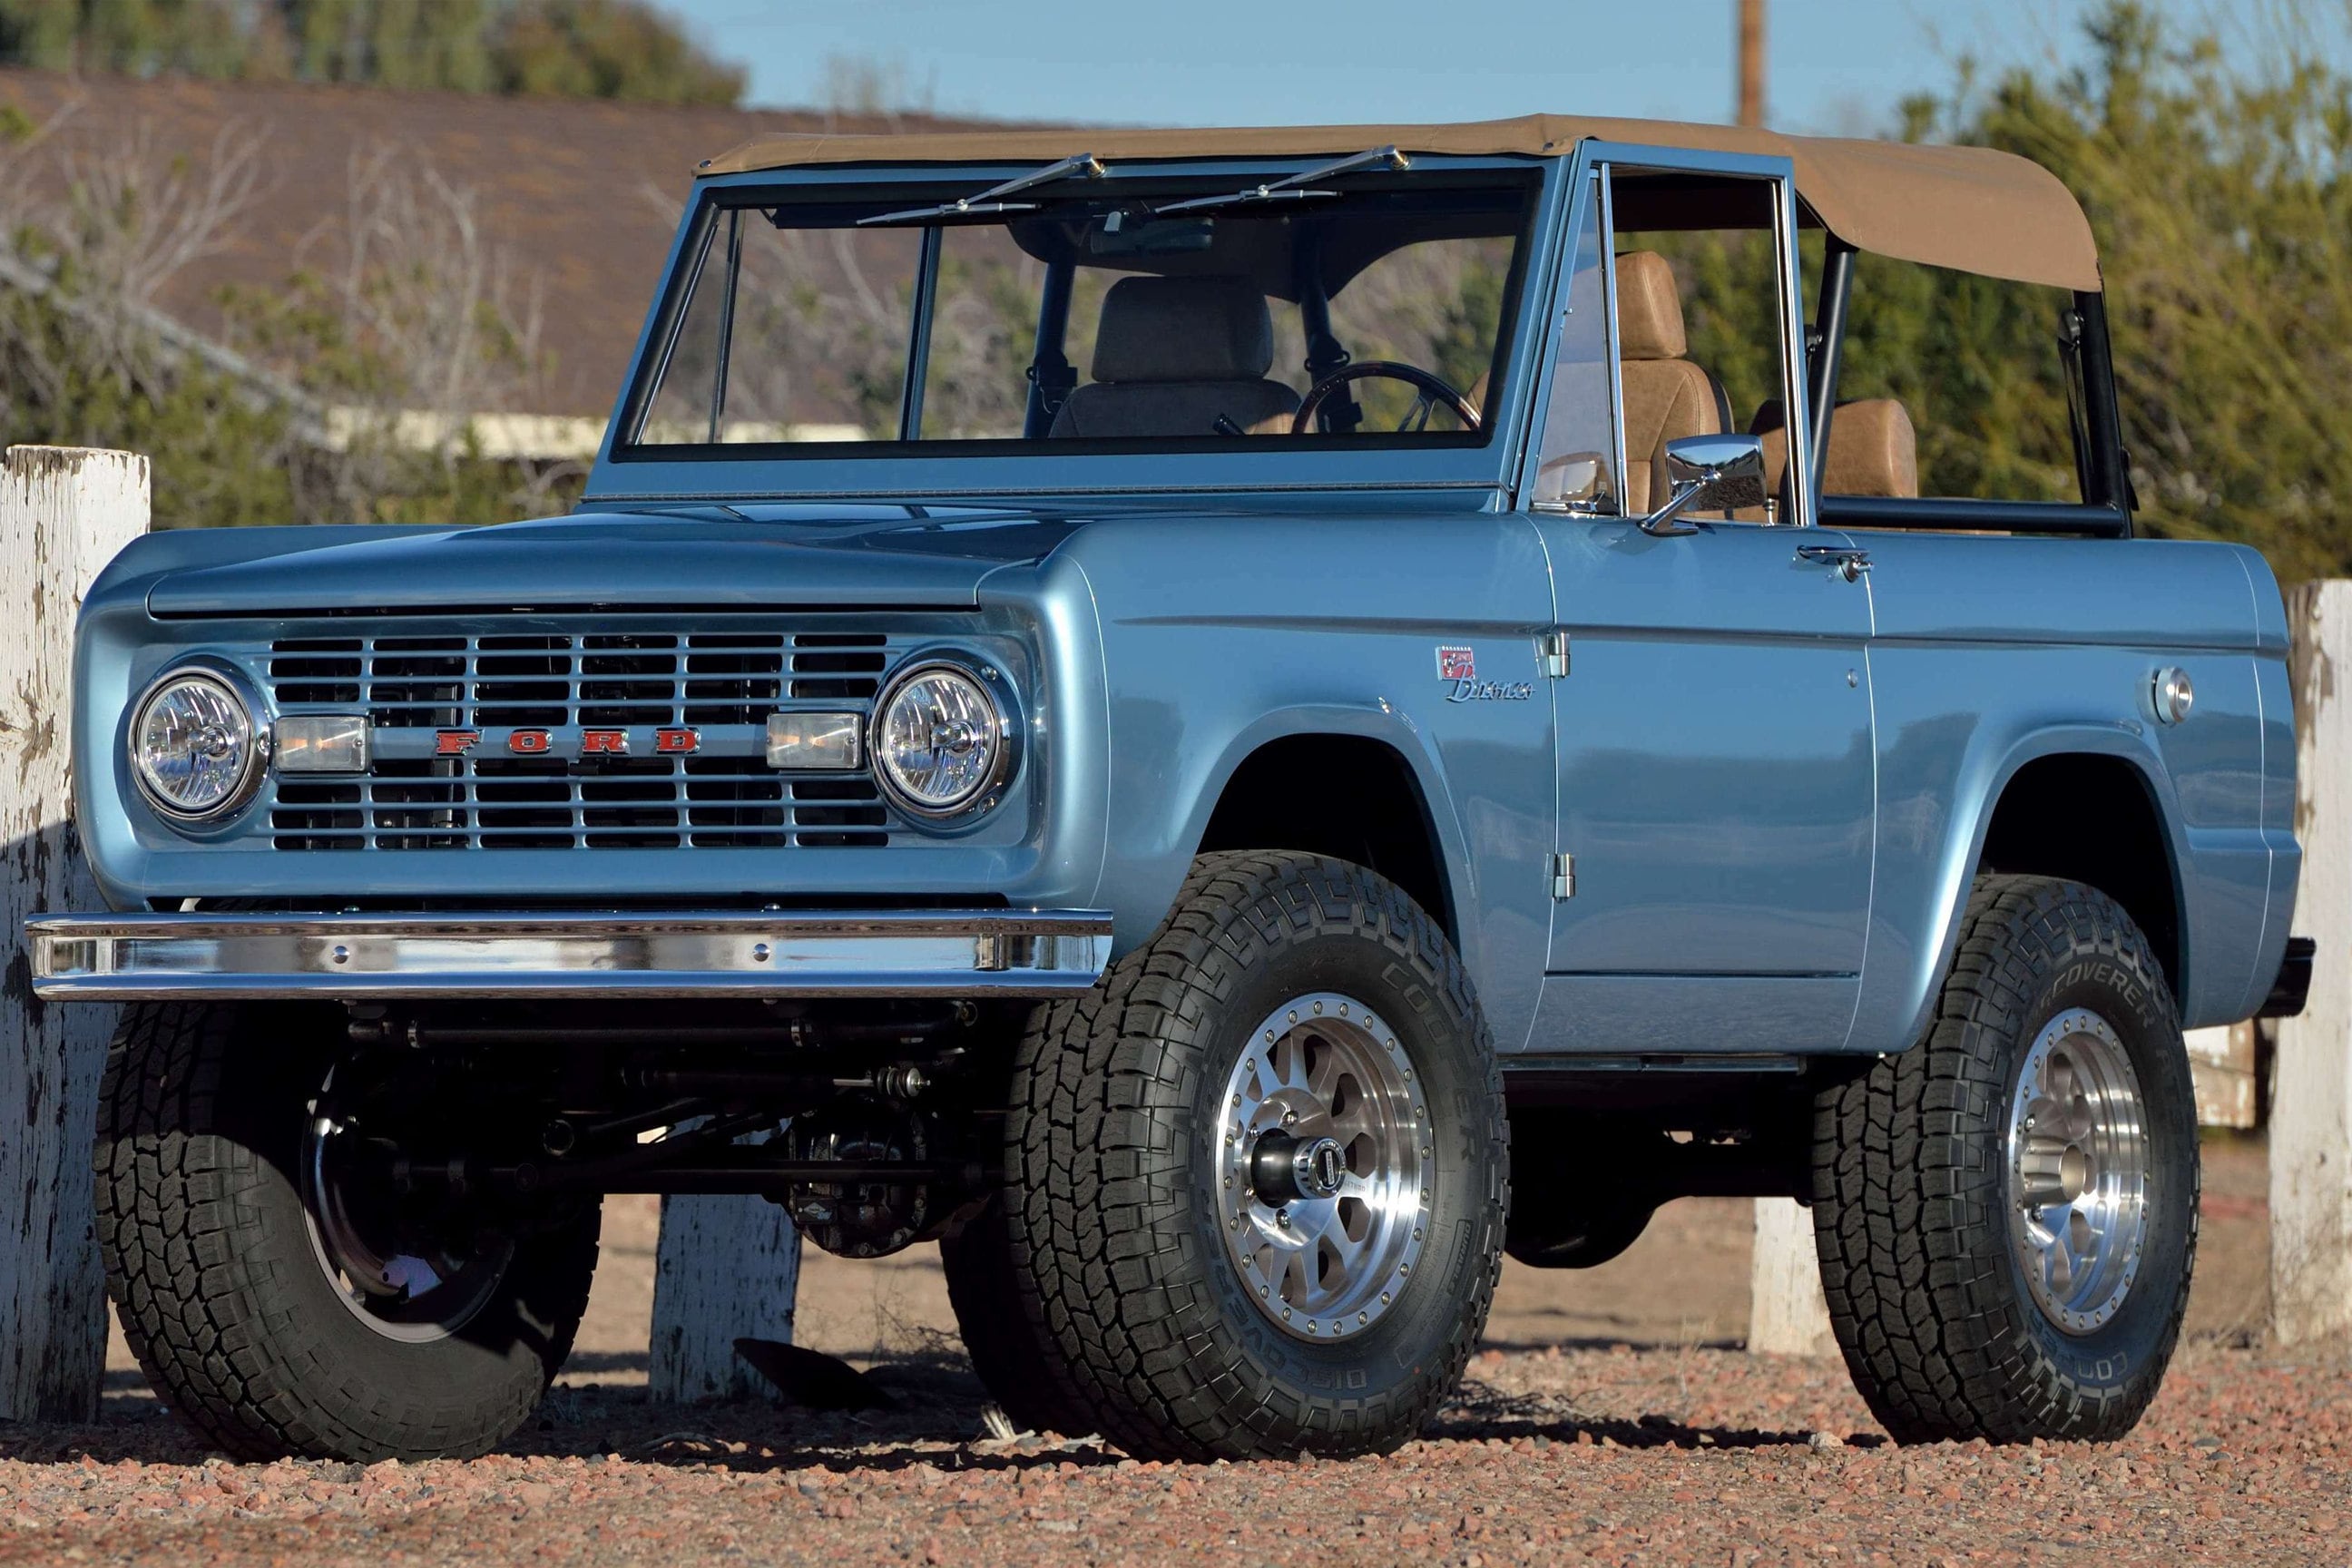 1968 Ford Bronco in Blue Vintage Machine Restored Classic pic